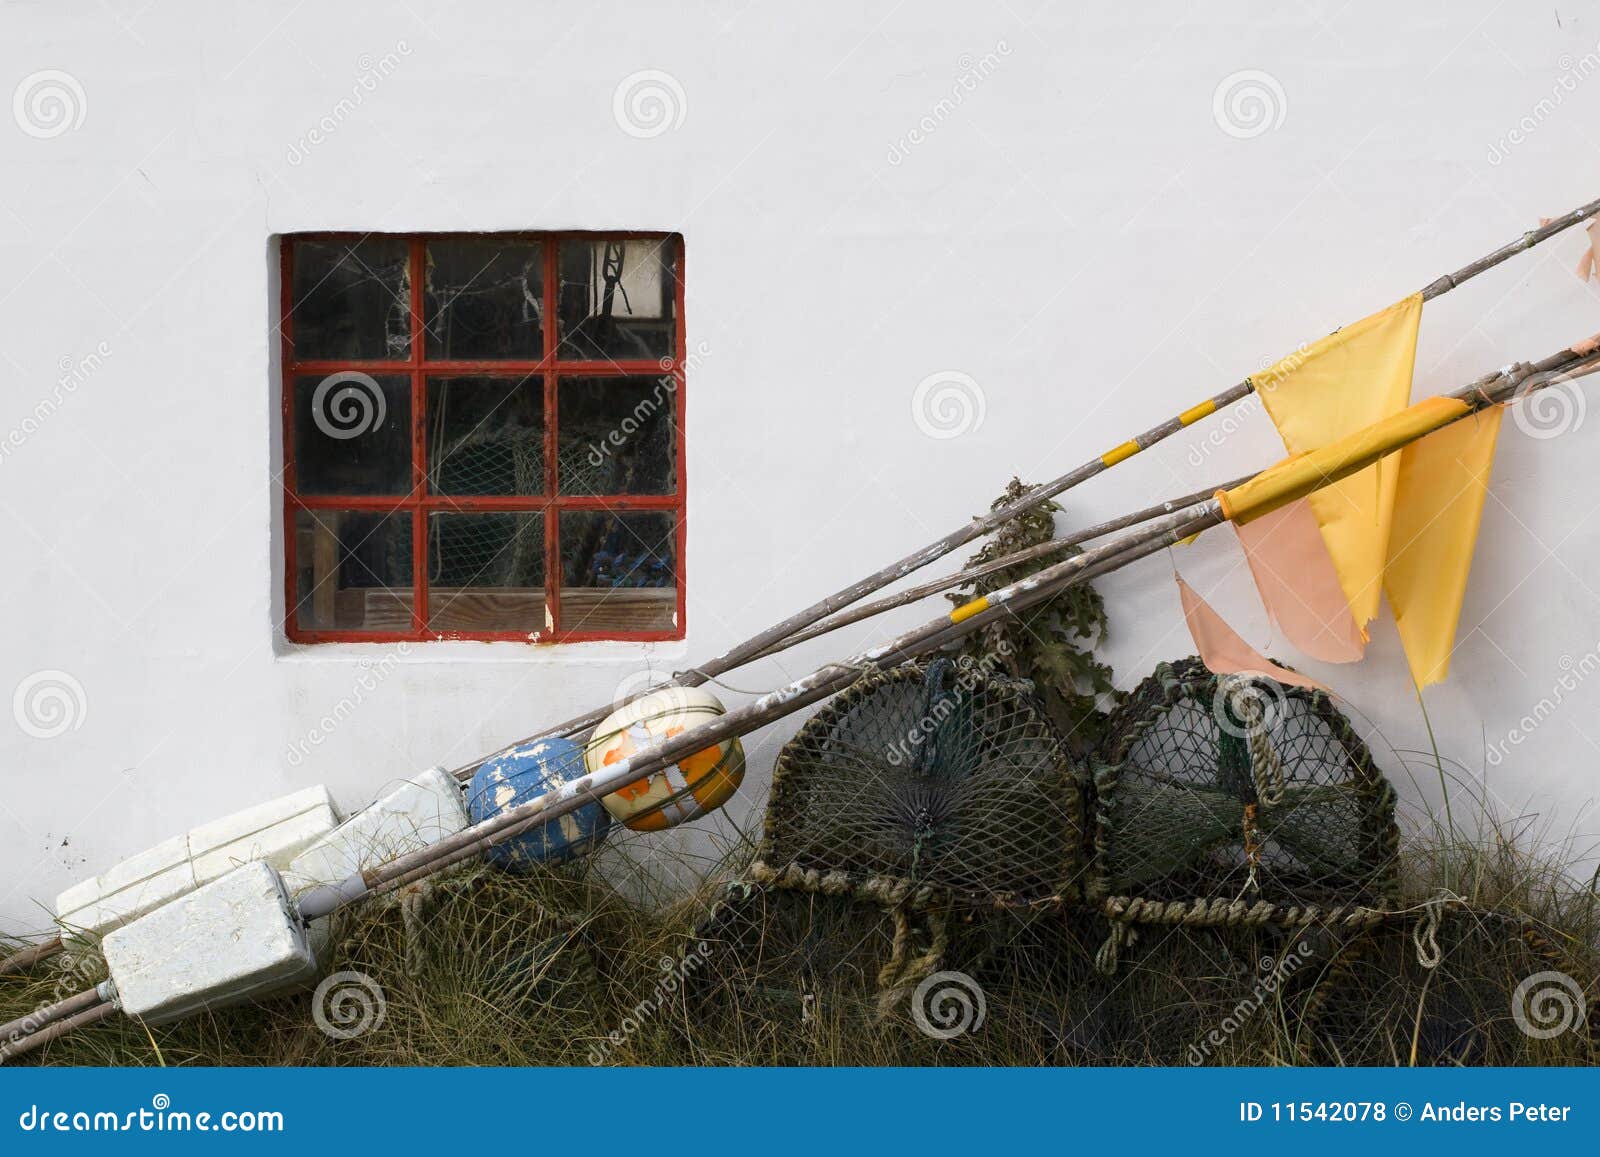 197 Window Fishing Equipment Stock Photos - Free & Royalty-Free Stock  Photos from Dreamstime